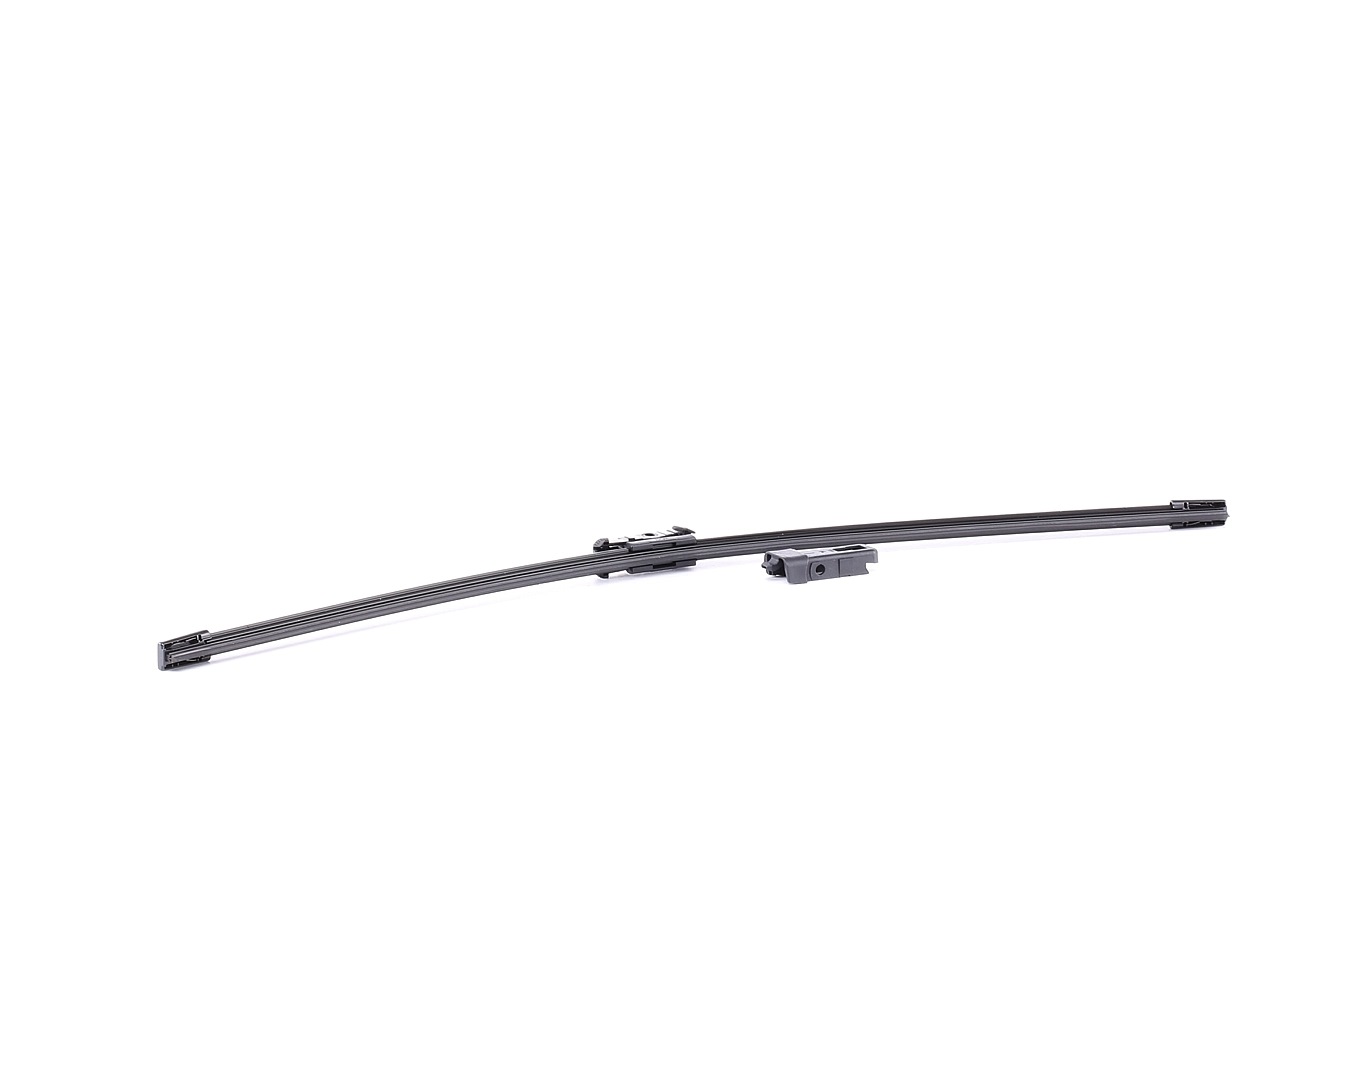 VALEO COMPACT EVOLUTION 575914 Wiper blade 600 mm, Beam, with spoiler, 24 Inch , Hook fixing, Top Lock, Pin Fixing